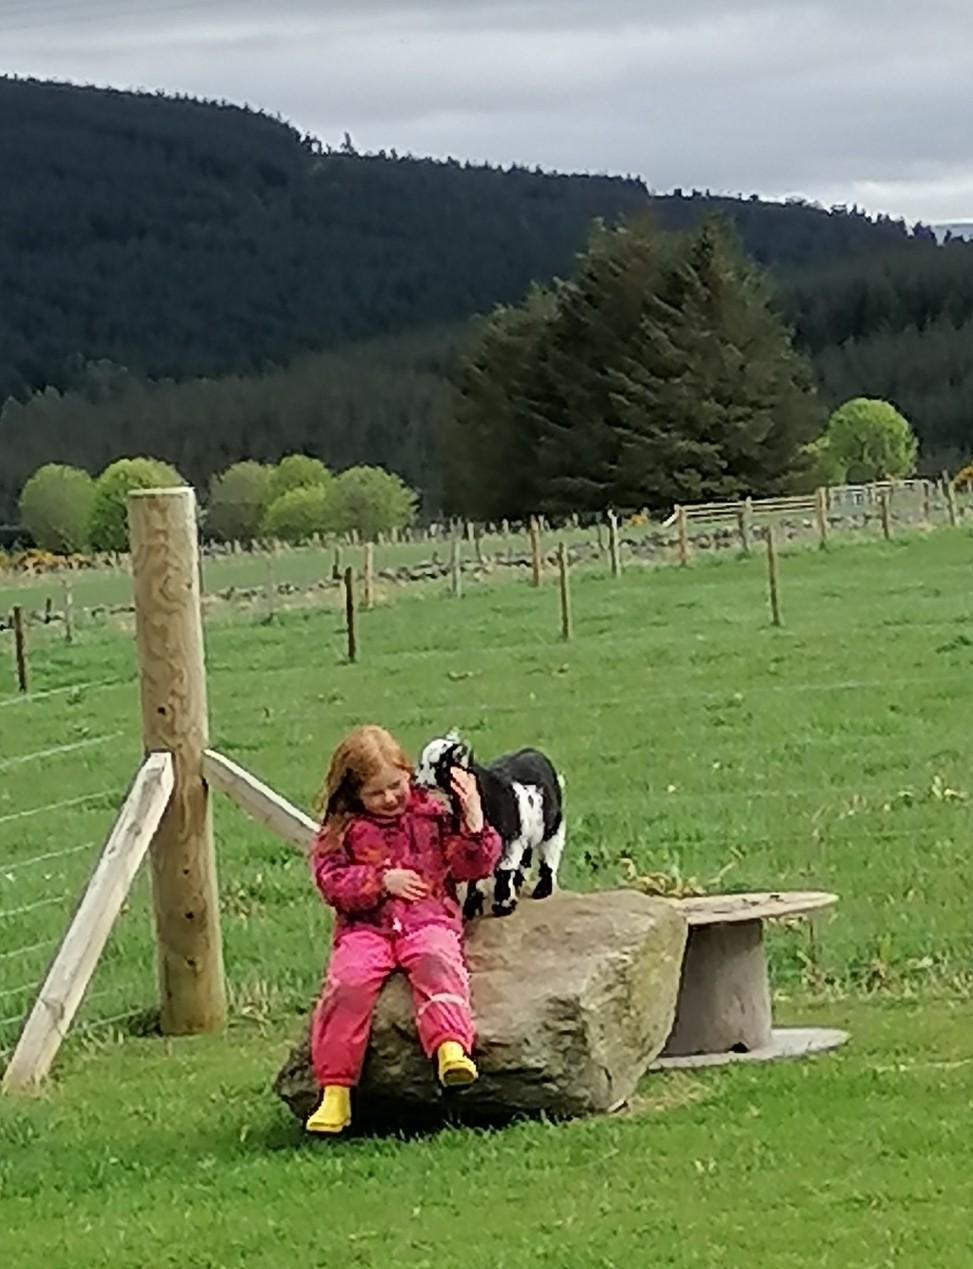 Sam McCombie - Molly getting kisses from her pygmy goat Kid Everest.